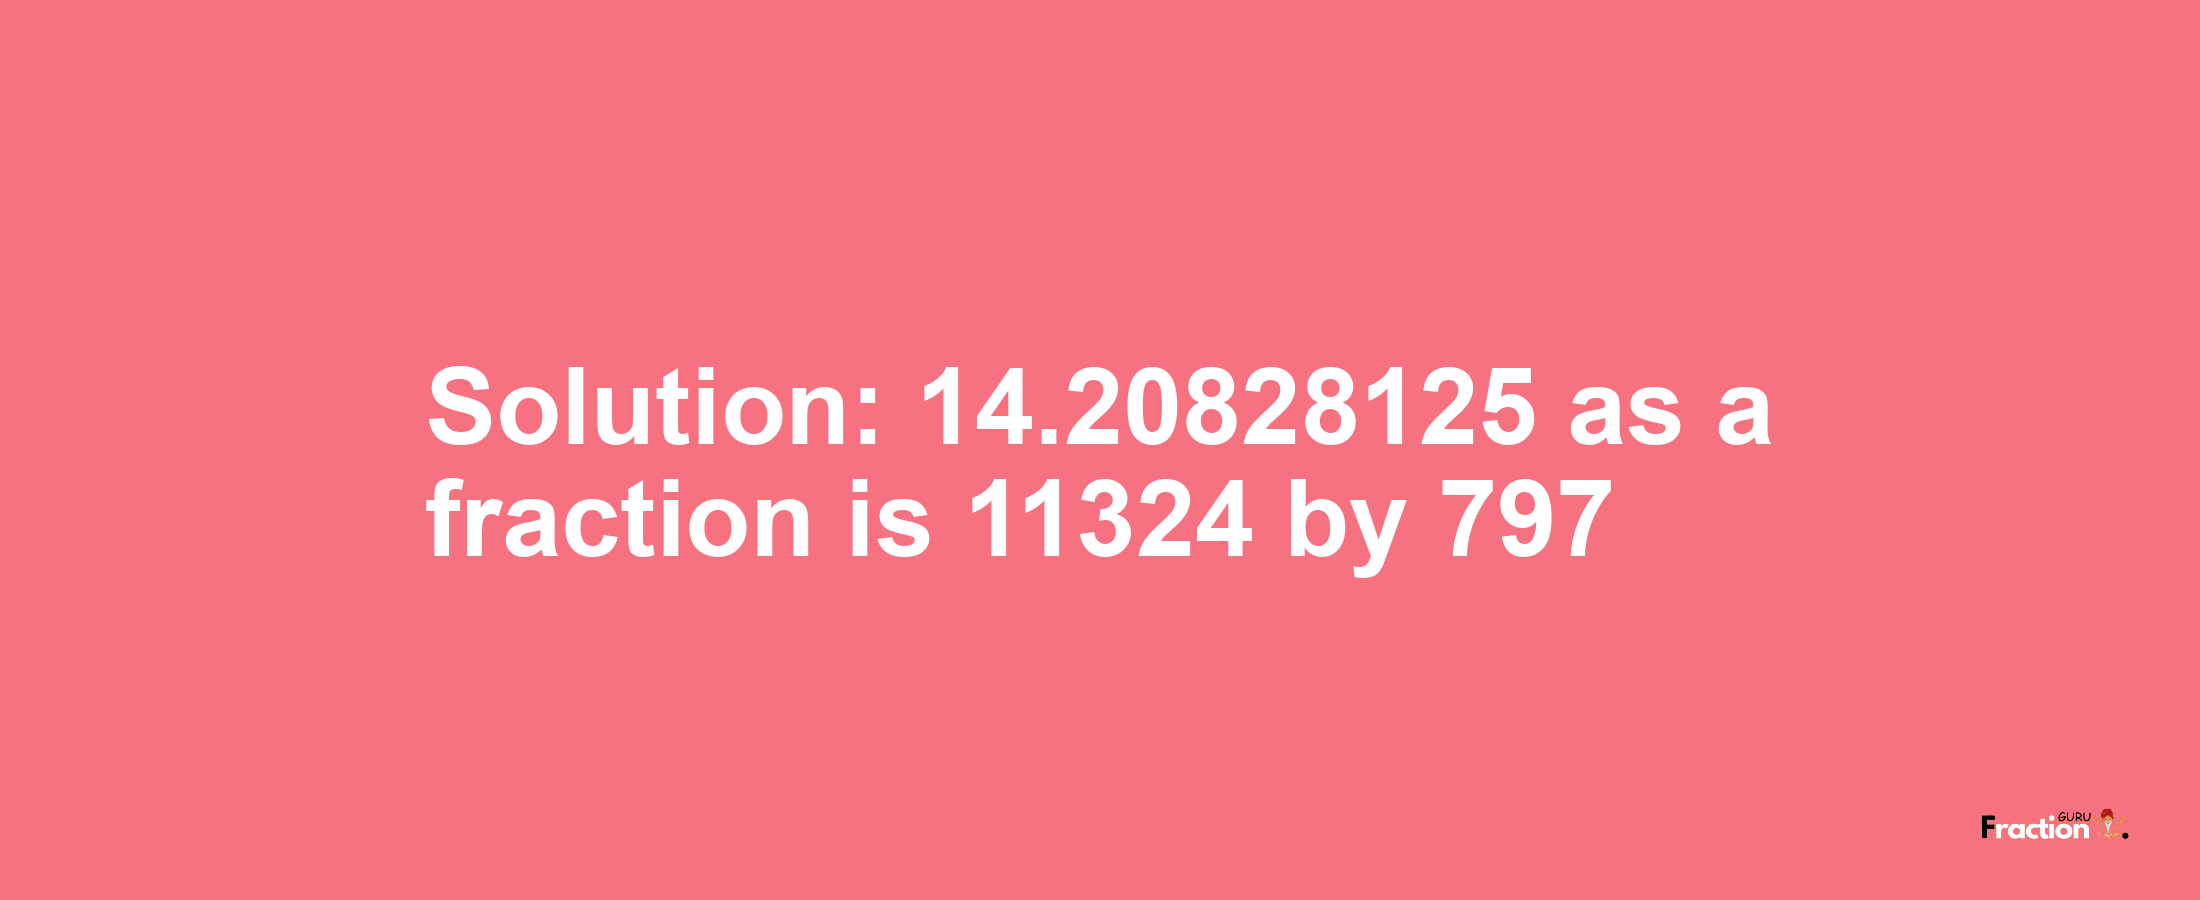 Solution:14.20828125 as a fraction is 11324/797